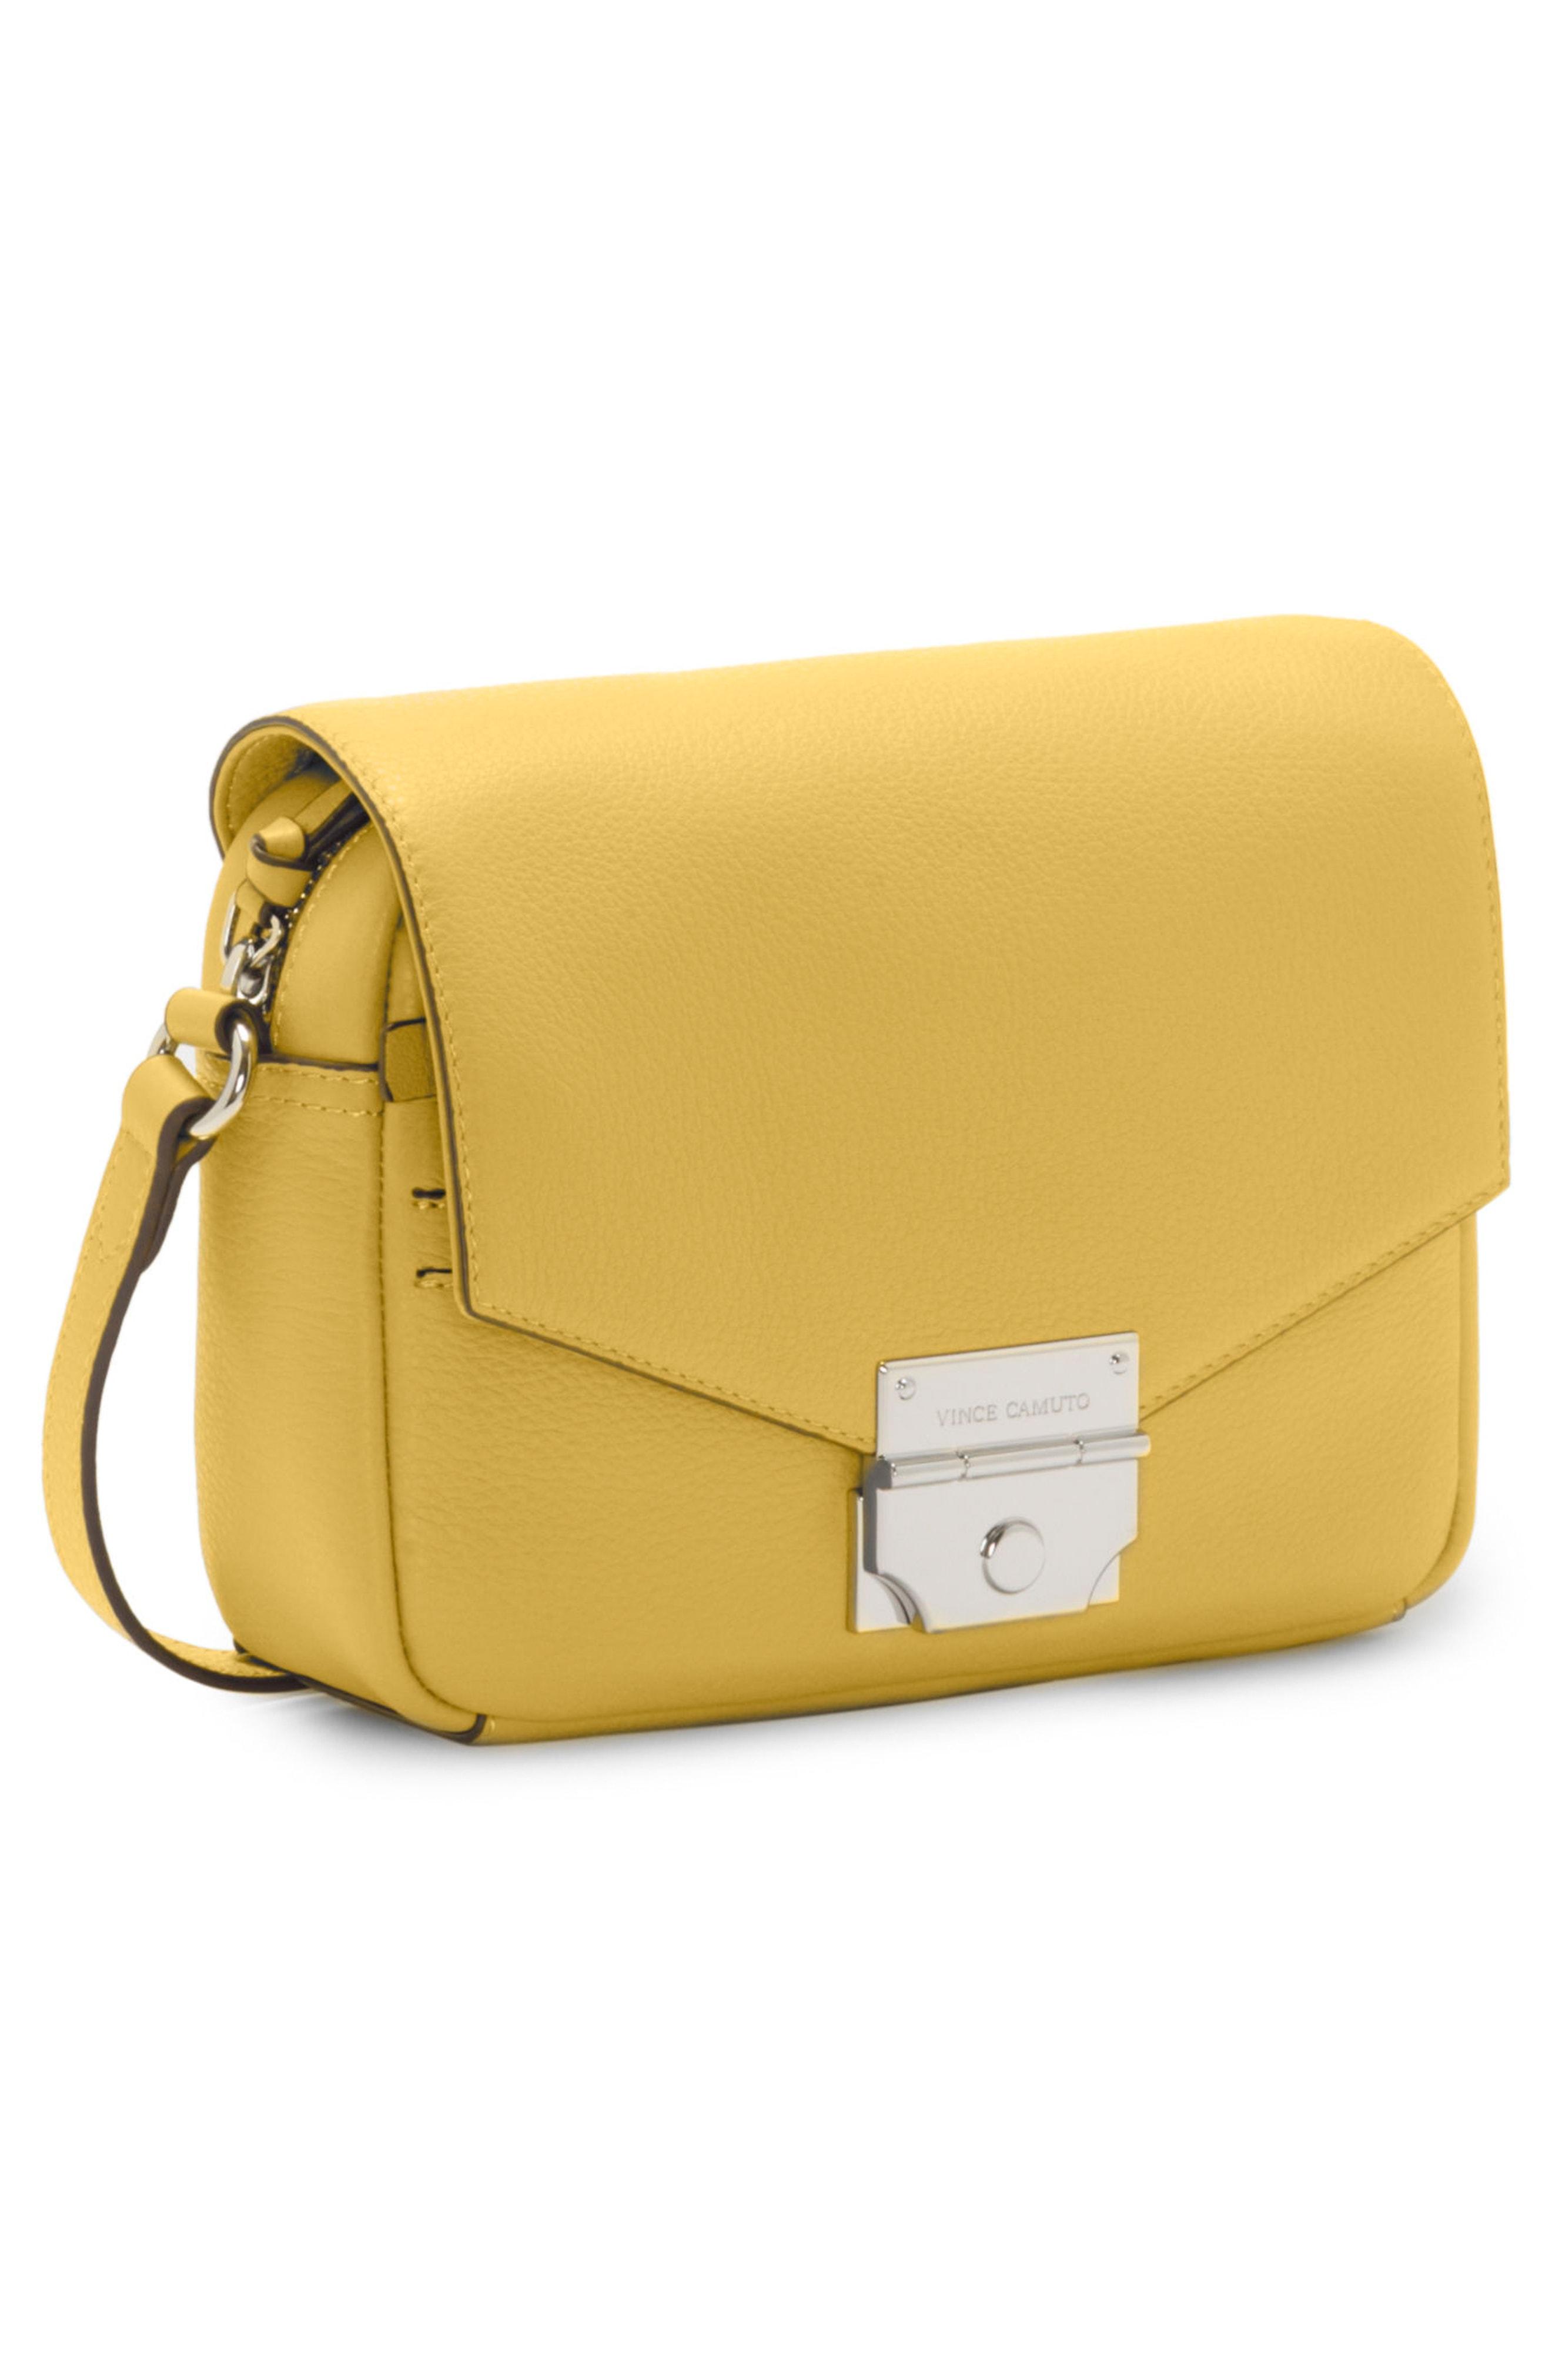 Vince Camuto Stina Leather Crossbody Bag - Yellow In Canary | ModeSens